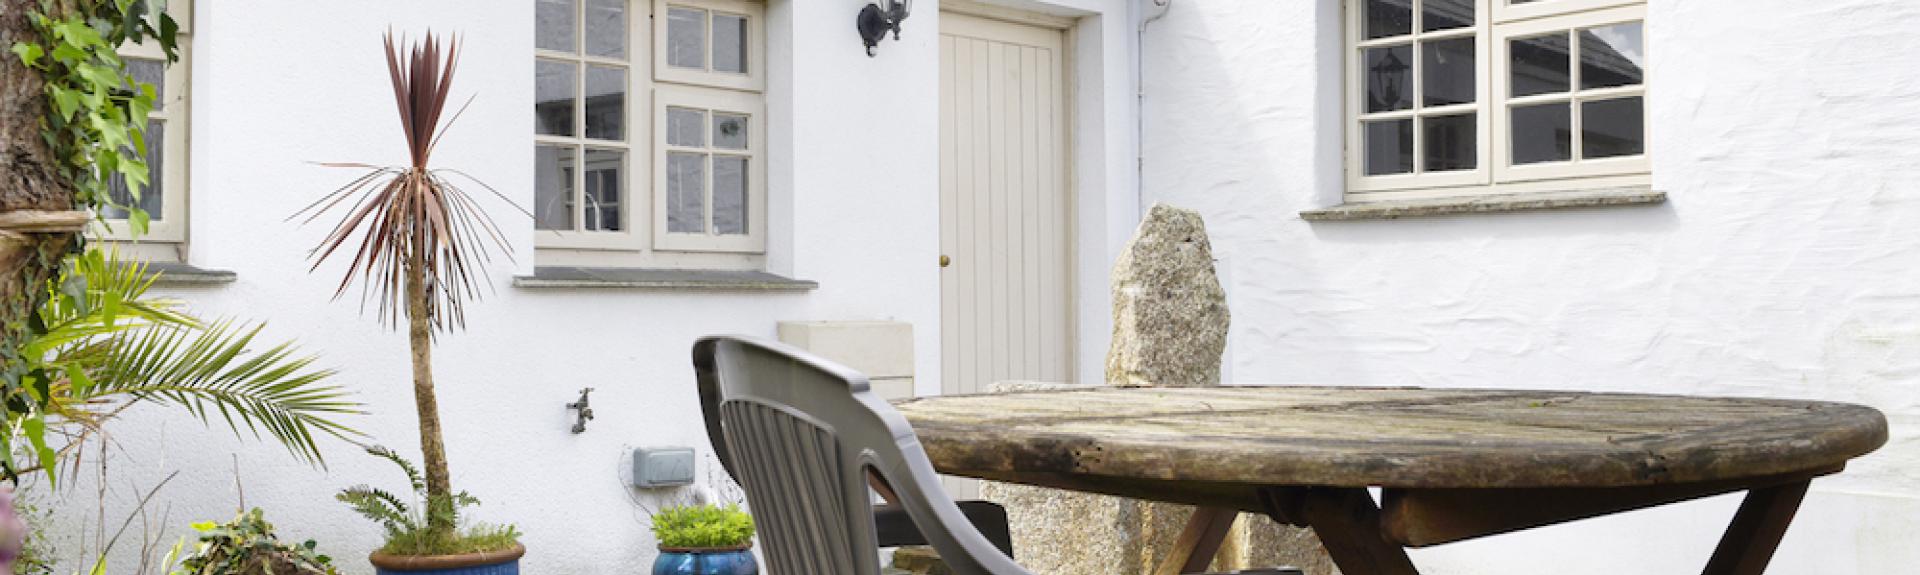 Whitewashed extrior of a Cornish cottage overlooking a courtyard.